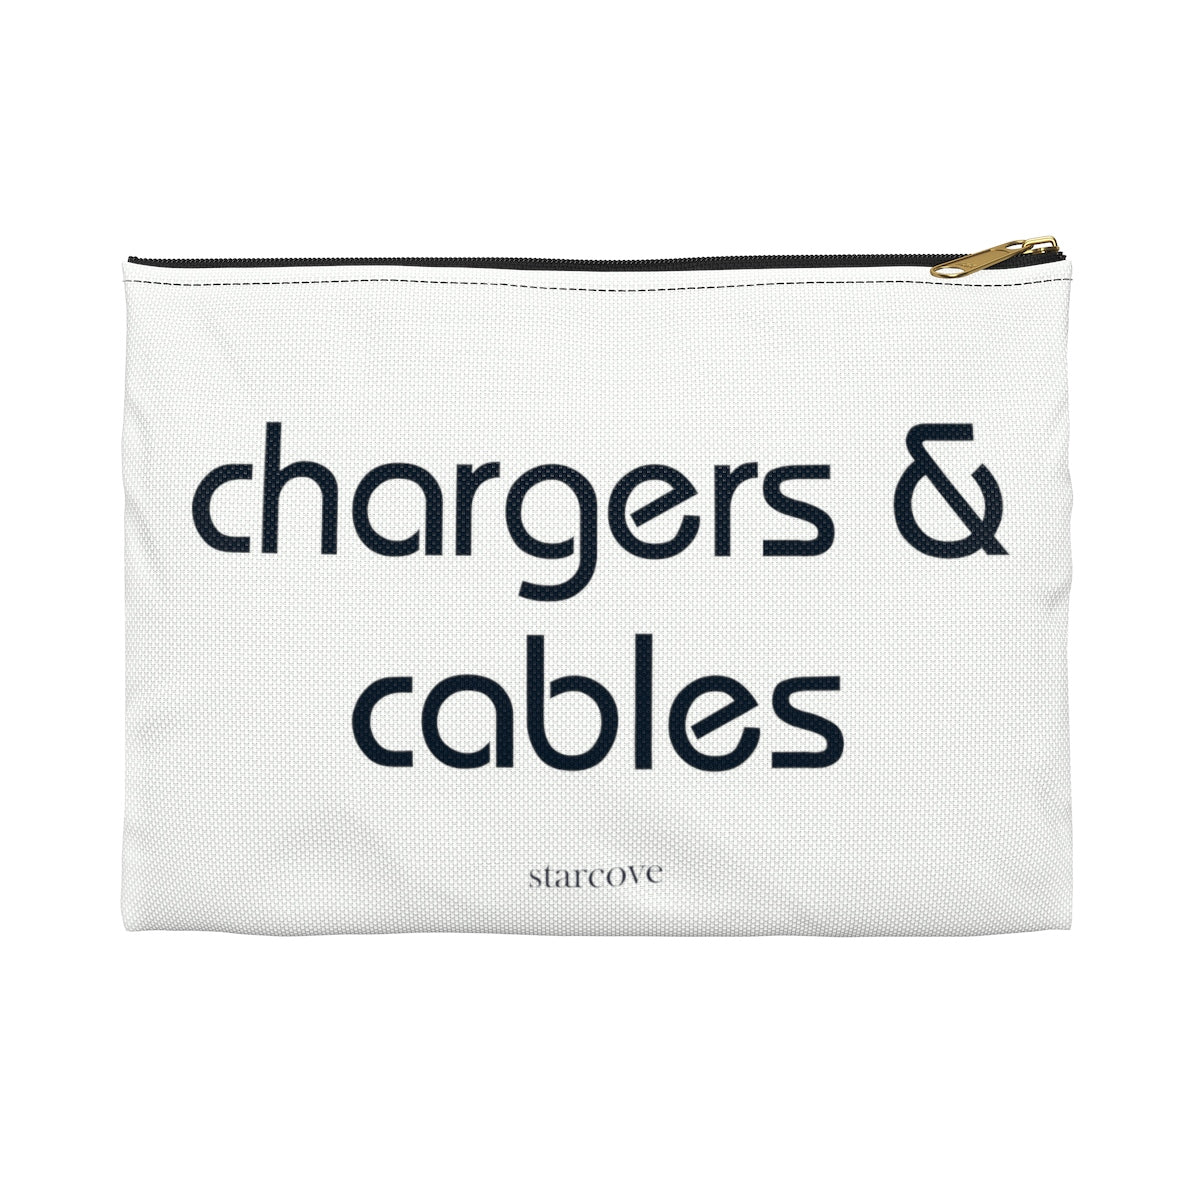 Chargers and cables bag, packing Travel bag Storage pouch, Traveling Accessory Flat Zipper Pouch Gift Starcove Fashion